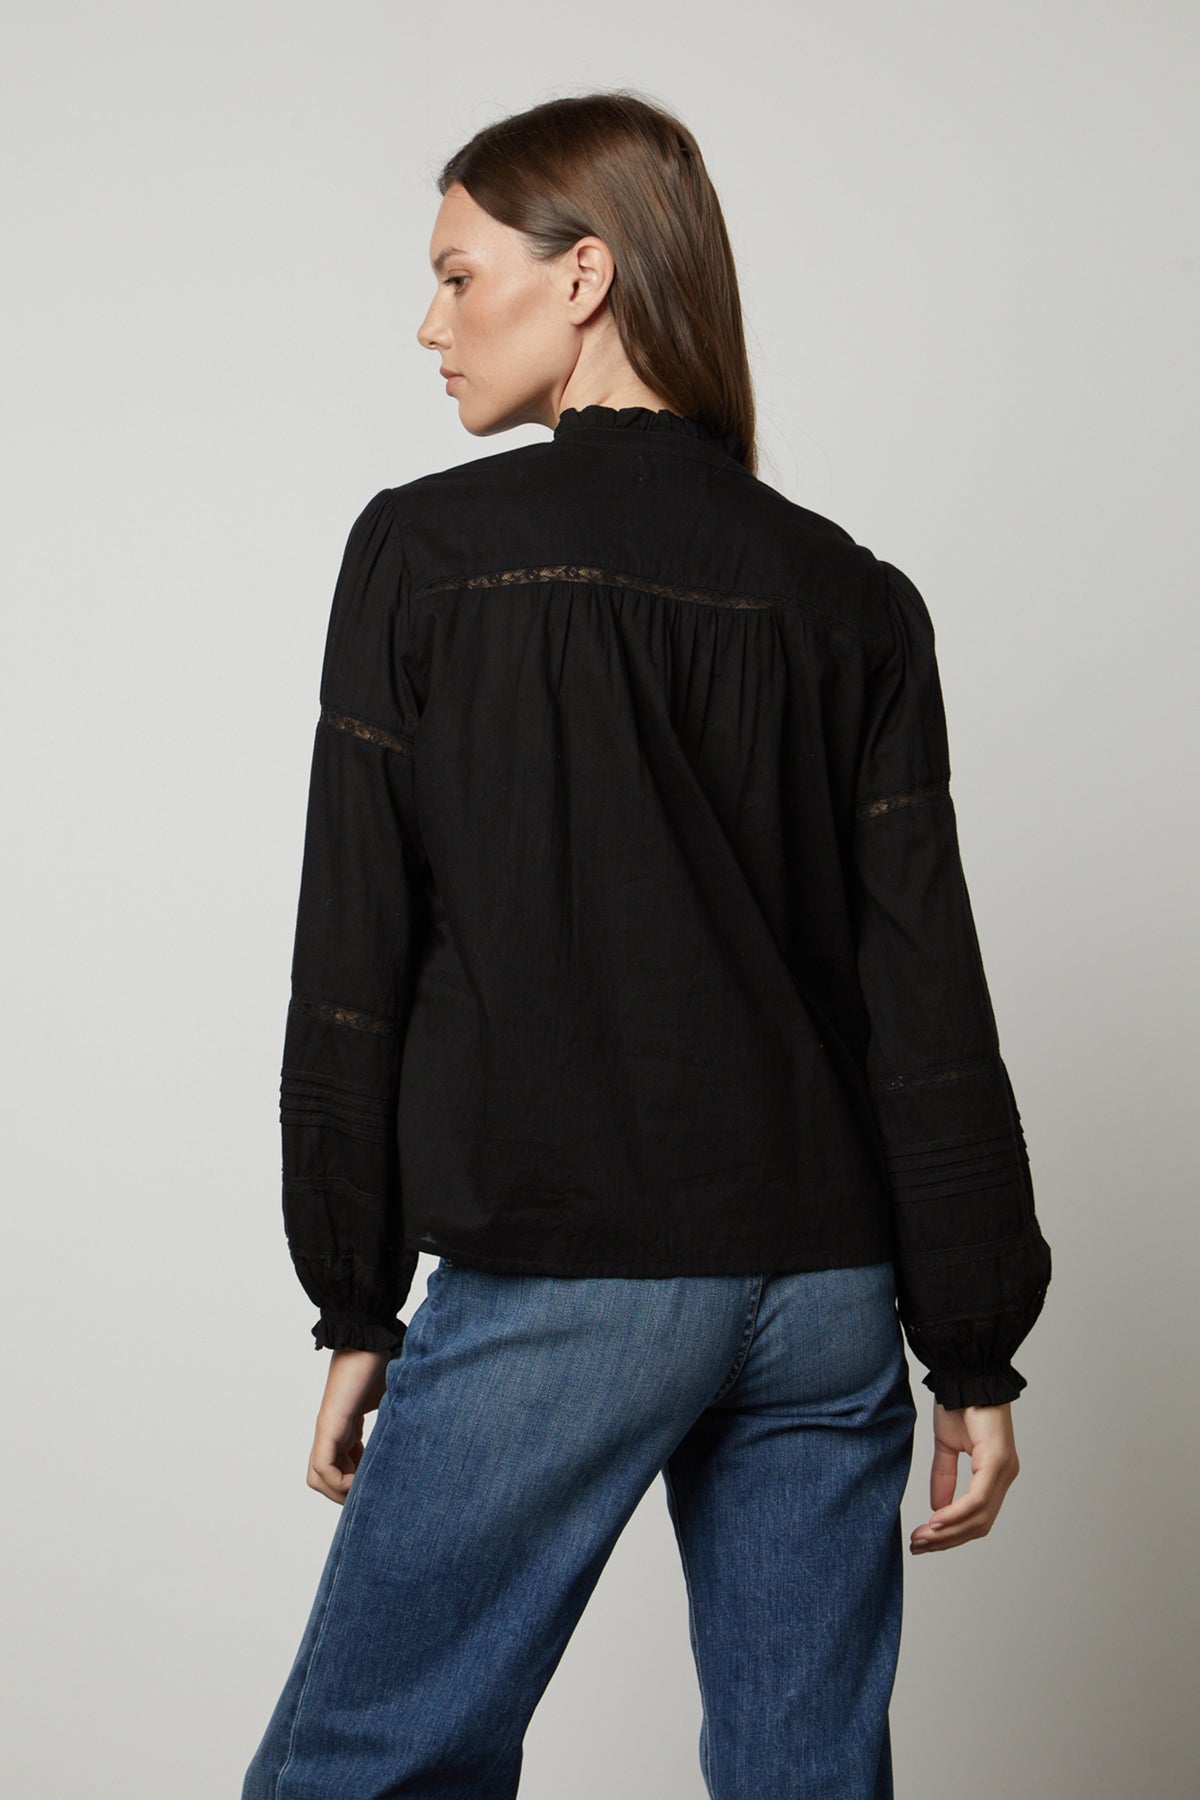 The back view of a woman wearing a Velvet by Graham & Spencer ROMY LACE BOHO TOP blouse and jeans.-26834995740865